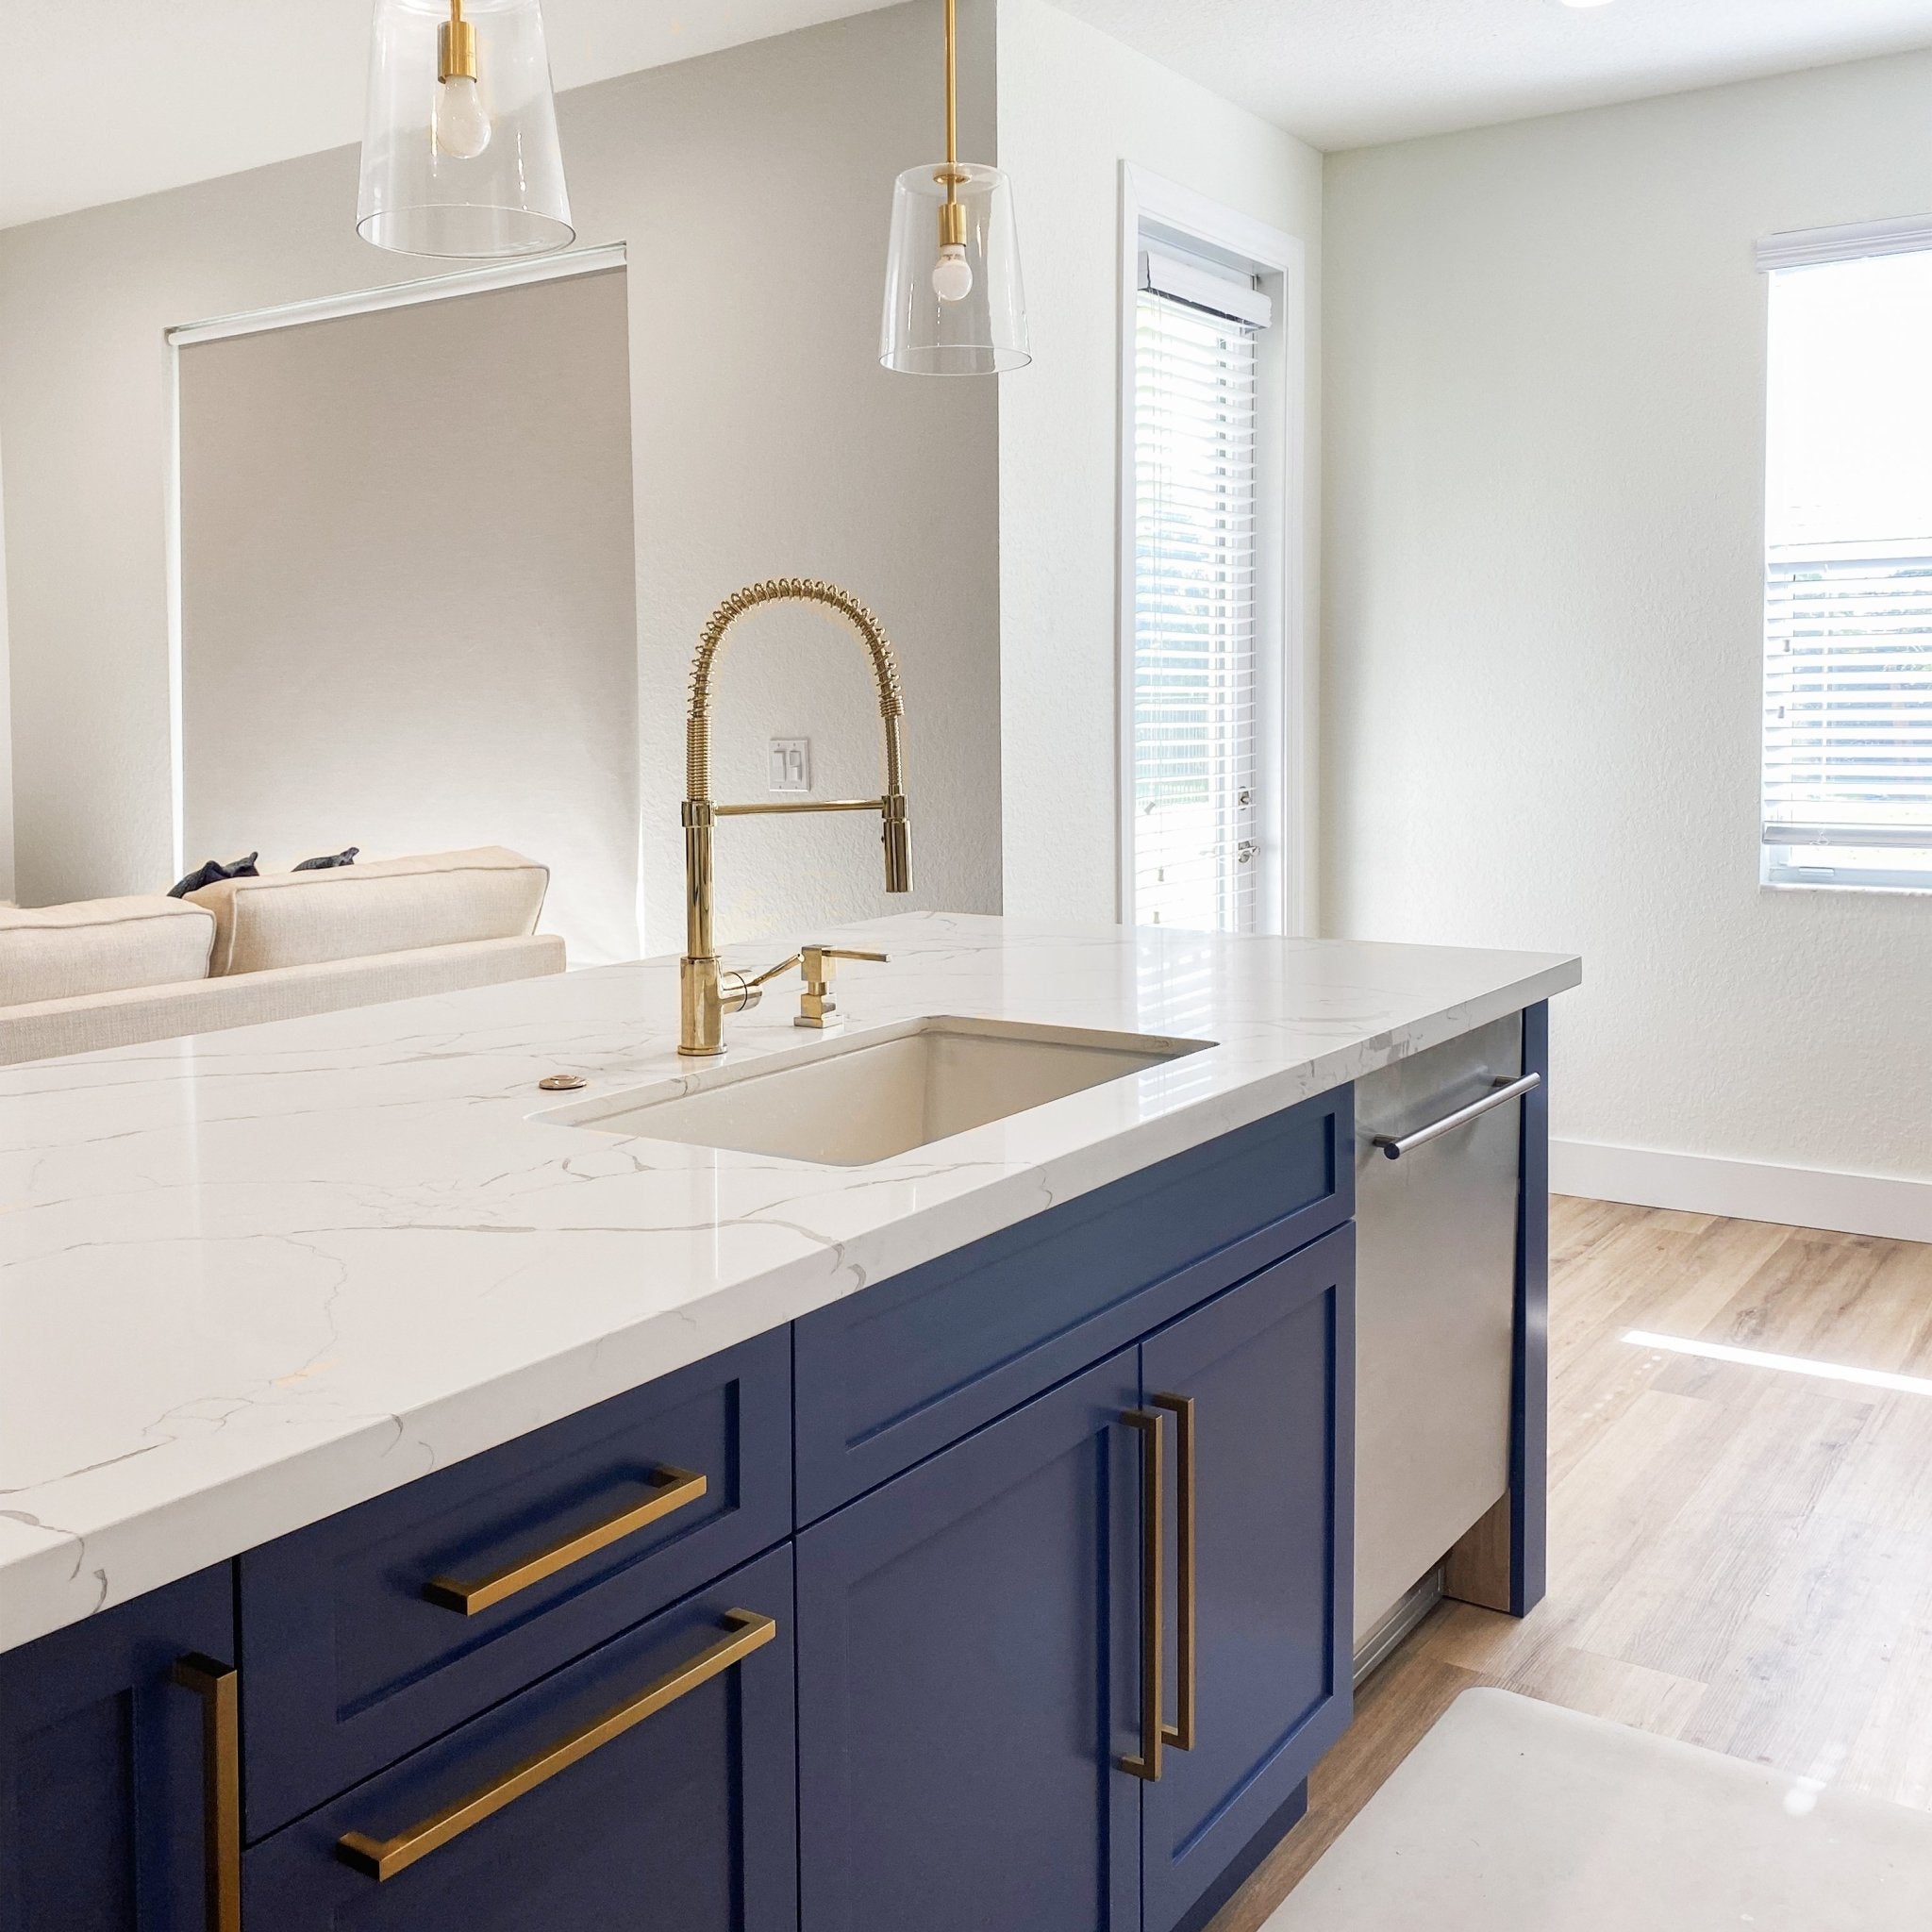 ZLINE Sierra Kitchen Faucet (SRA-KF) with Polished Gold Finish in luxury kitchen with white counters and blue cabinets